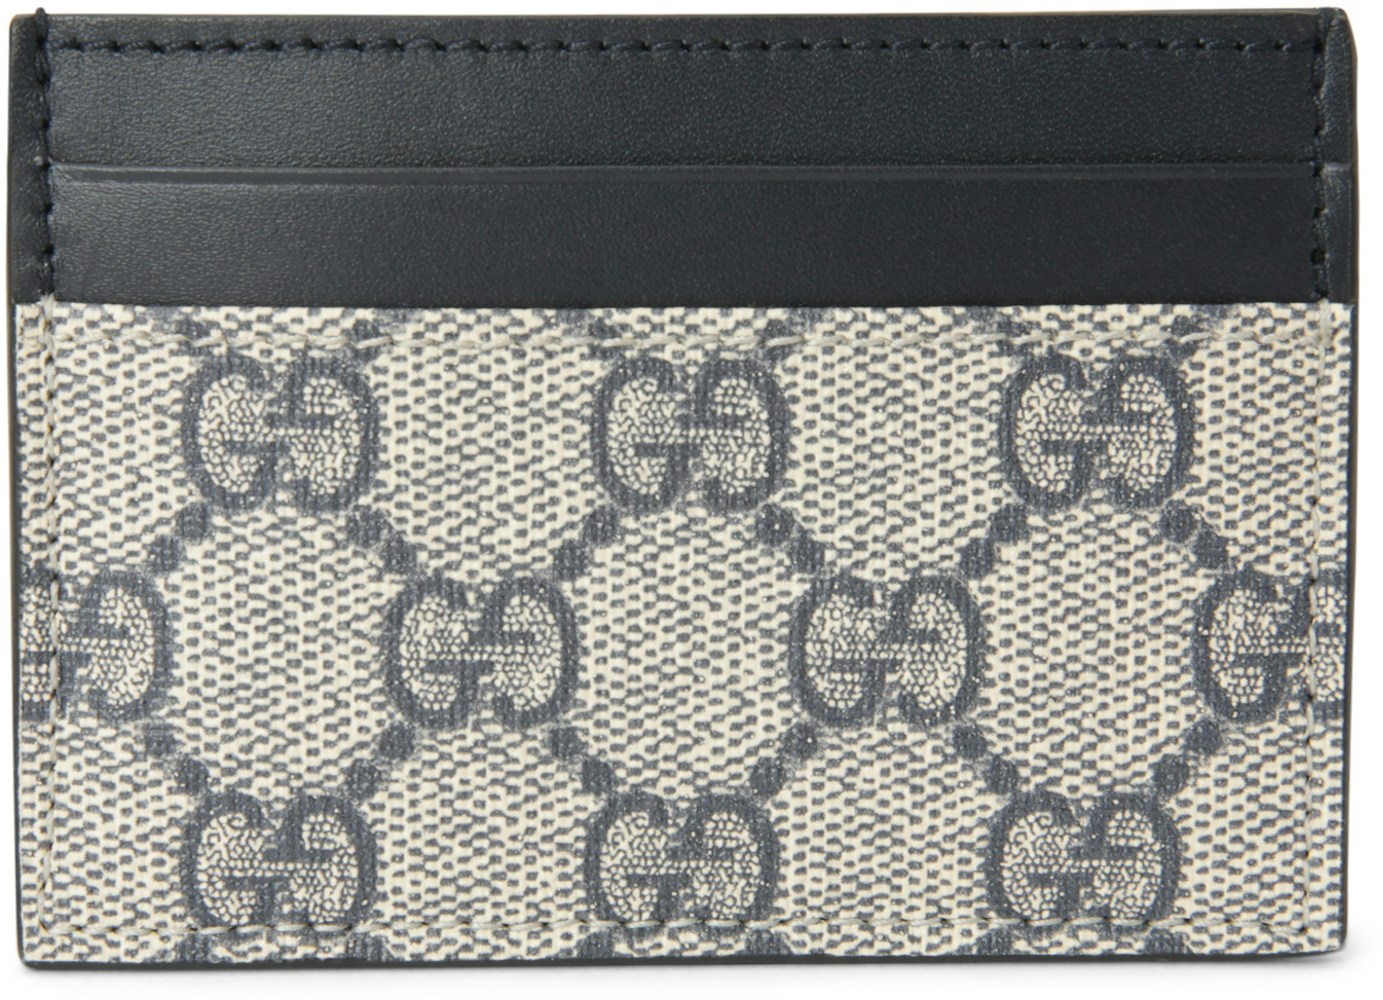 Takke duft krone Gucci Money Clip Card Case GG Supreme Beige/Black in Coated Canvas with  Silver-tone